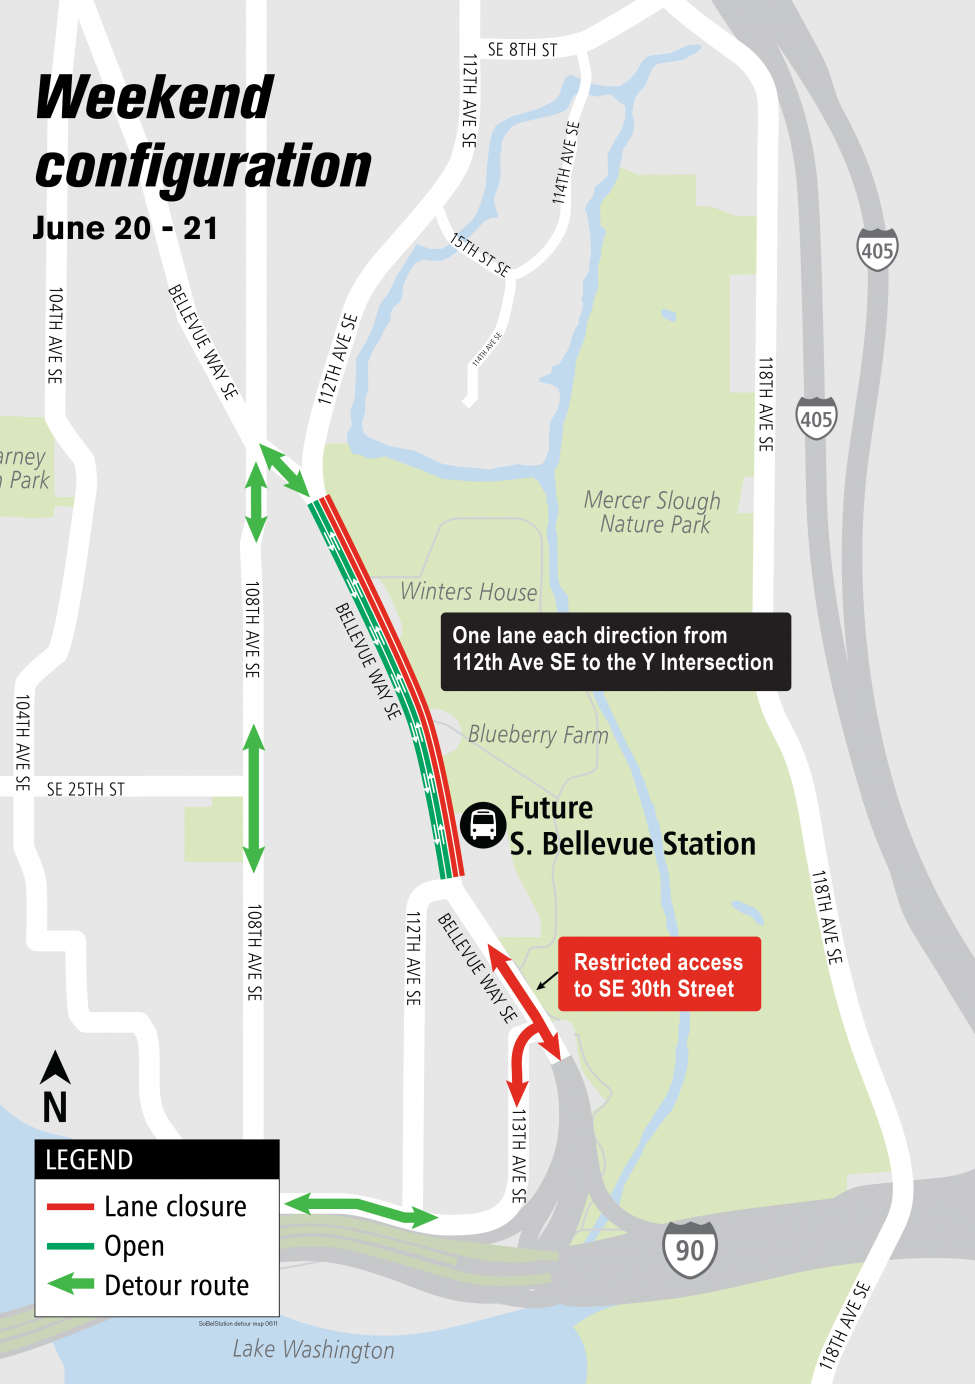 Map of weekend traffic configuration of Bellevue Way Southeast the weekend of June 20-21.